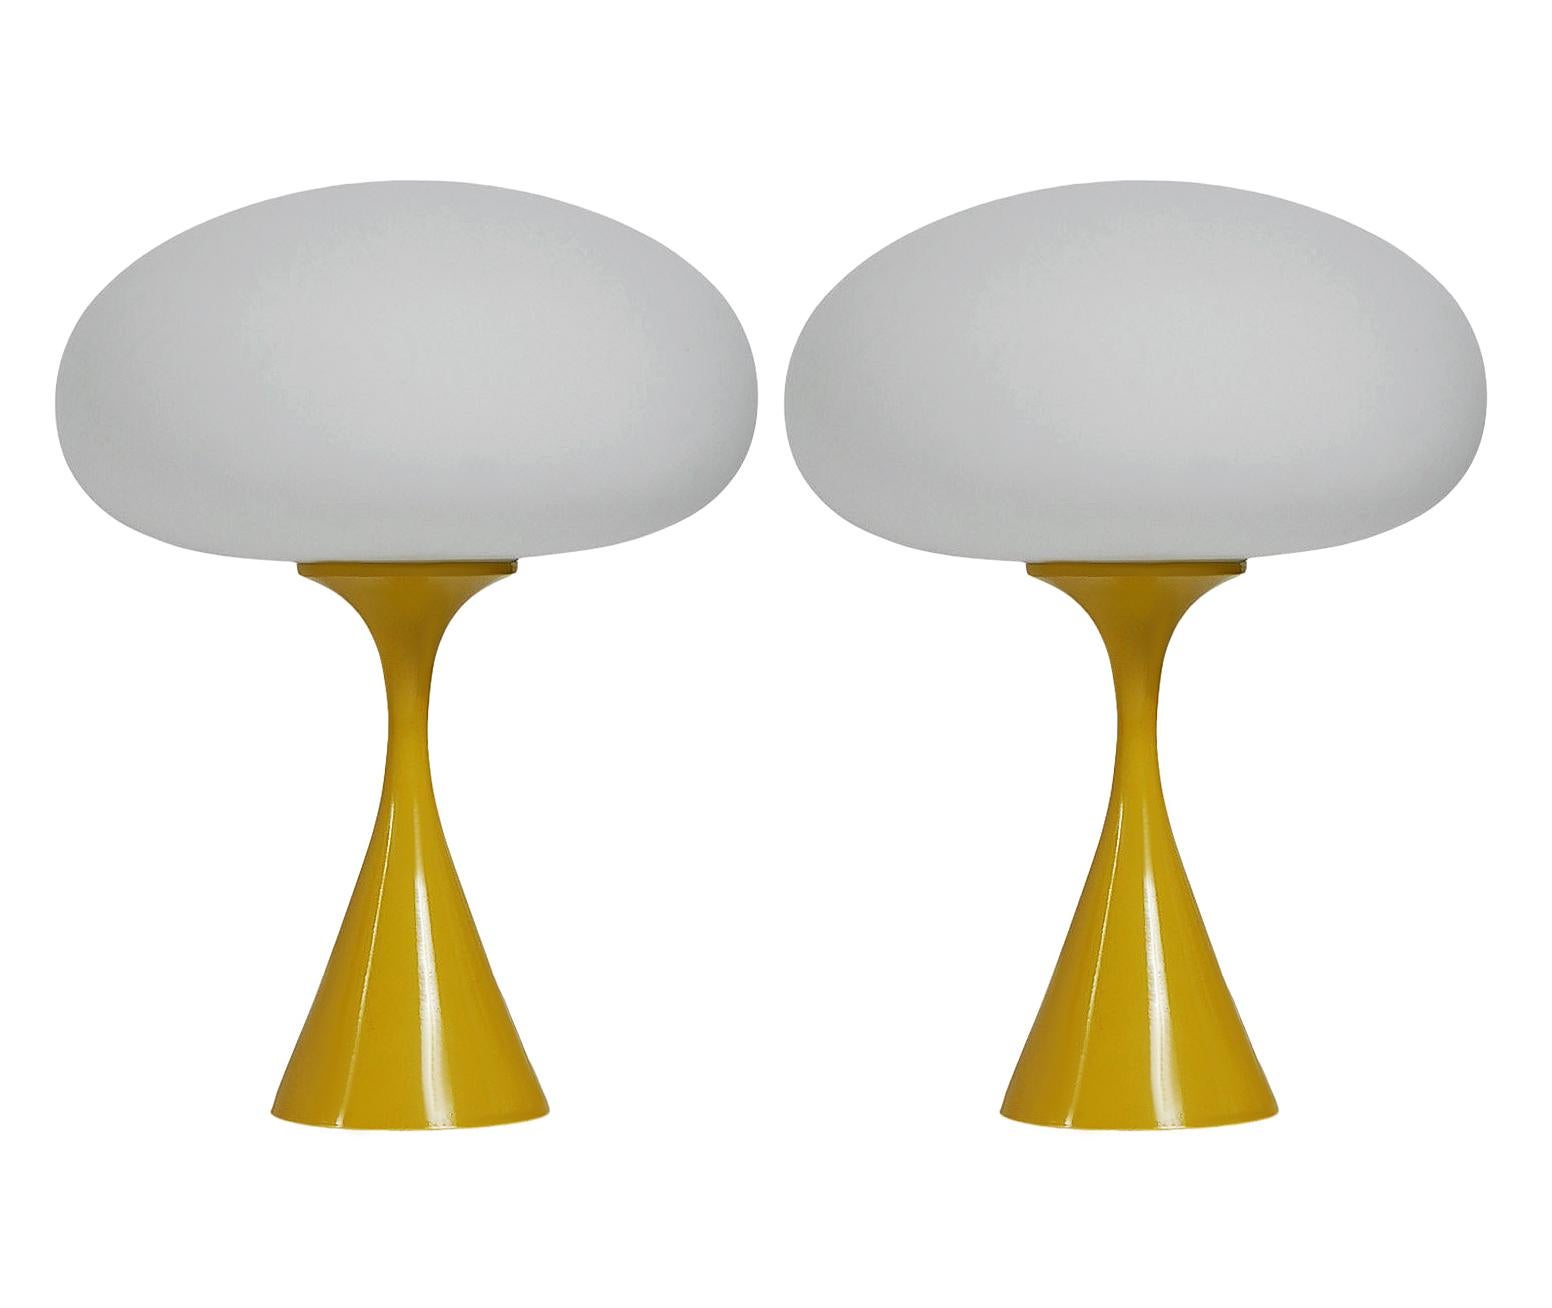 Pair of Mid-Century Modern Table Lamps by Designline in Yellow & White Glass For Sale 1